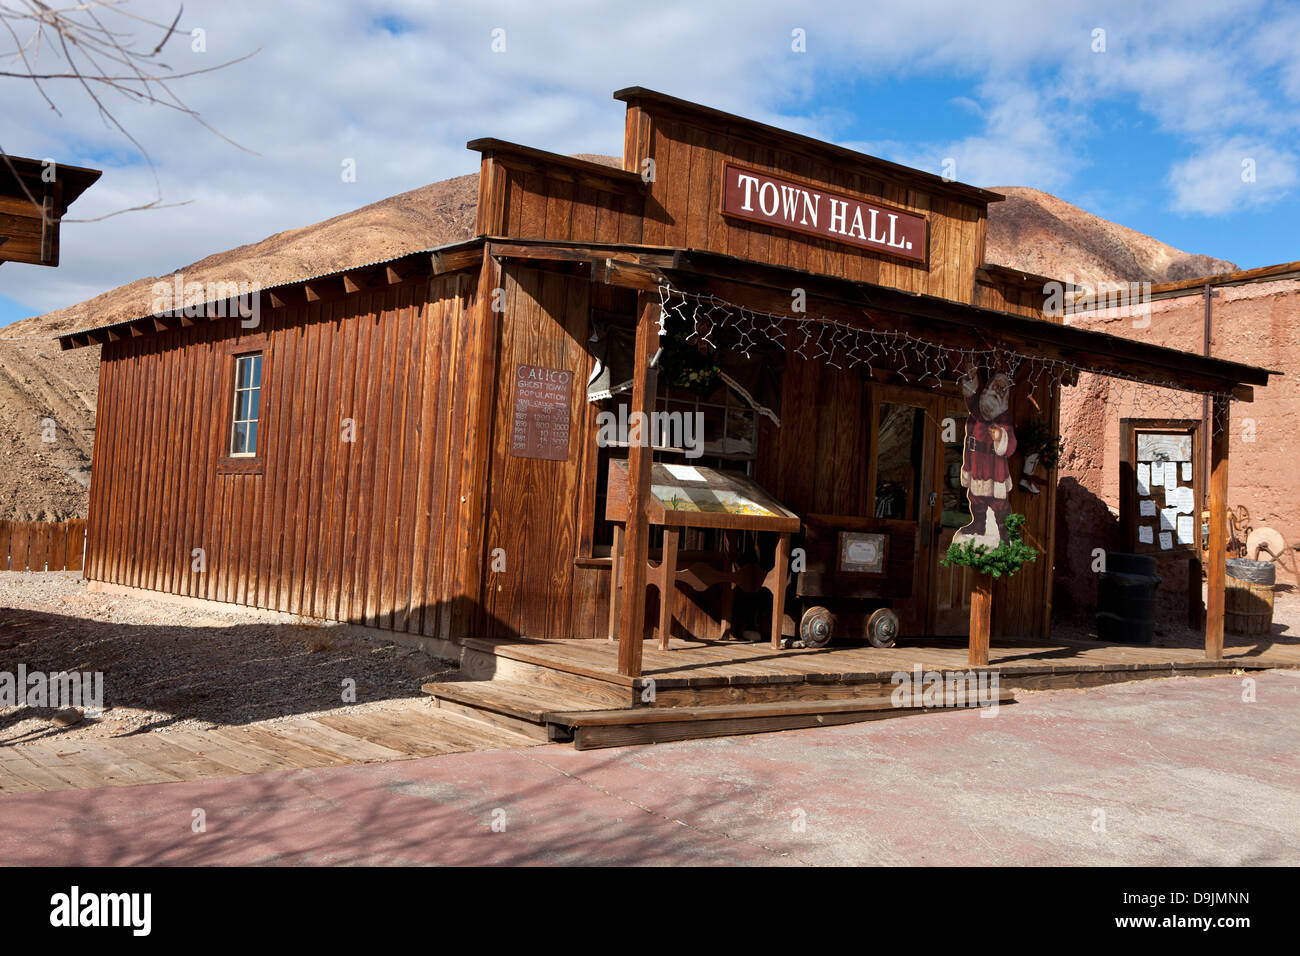 Town Hall Building, Calico Ghost Town, Calico, California, United States of America Stock Photo